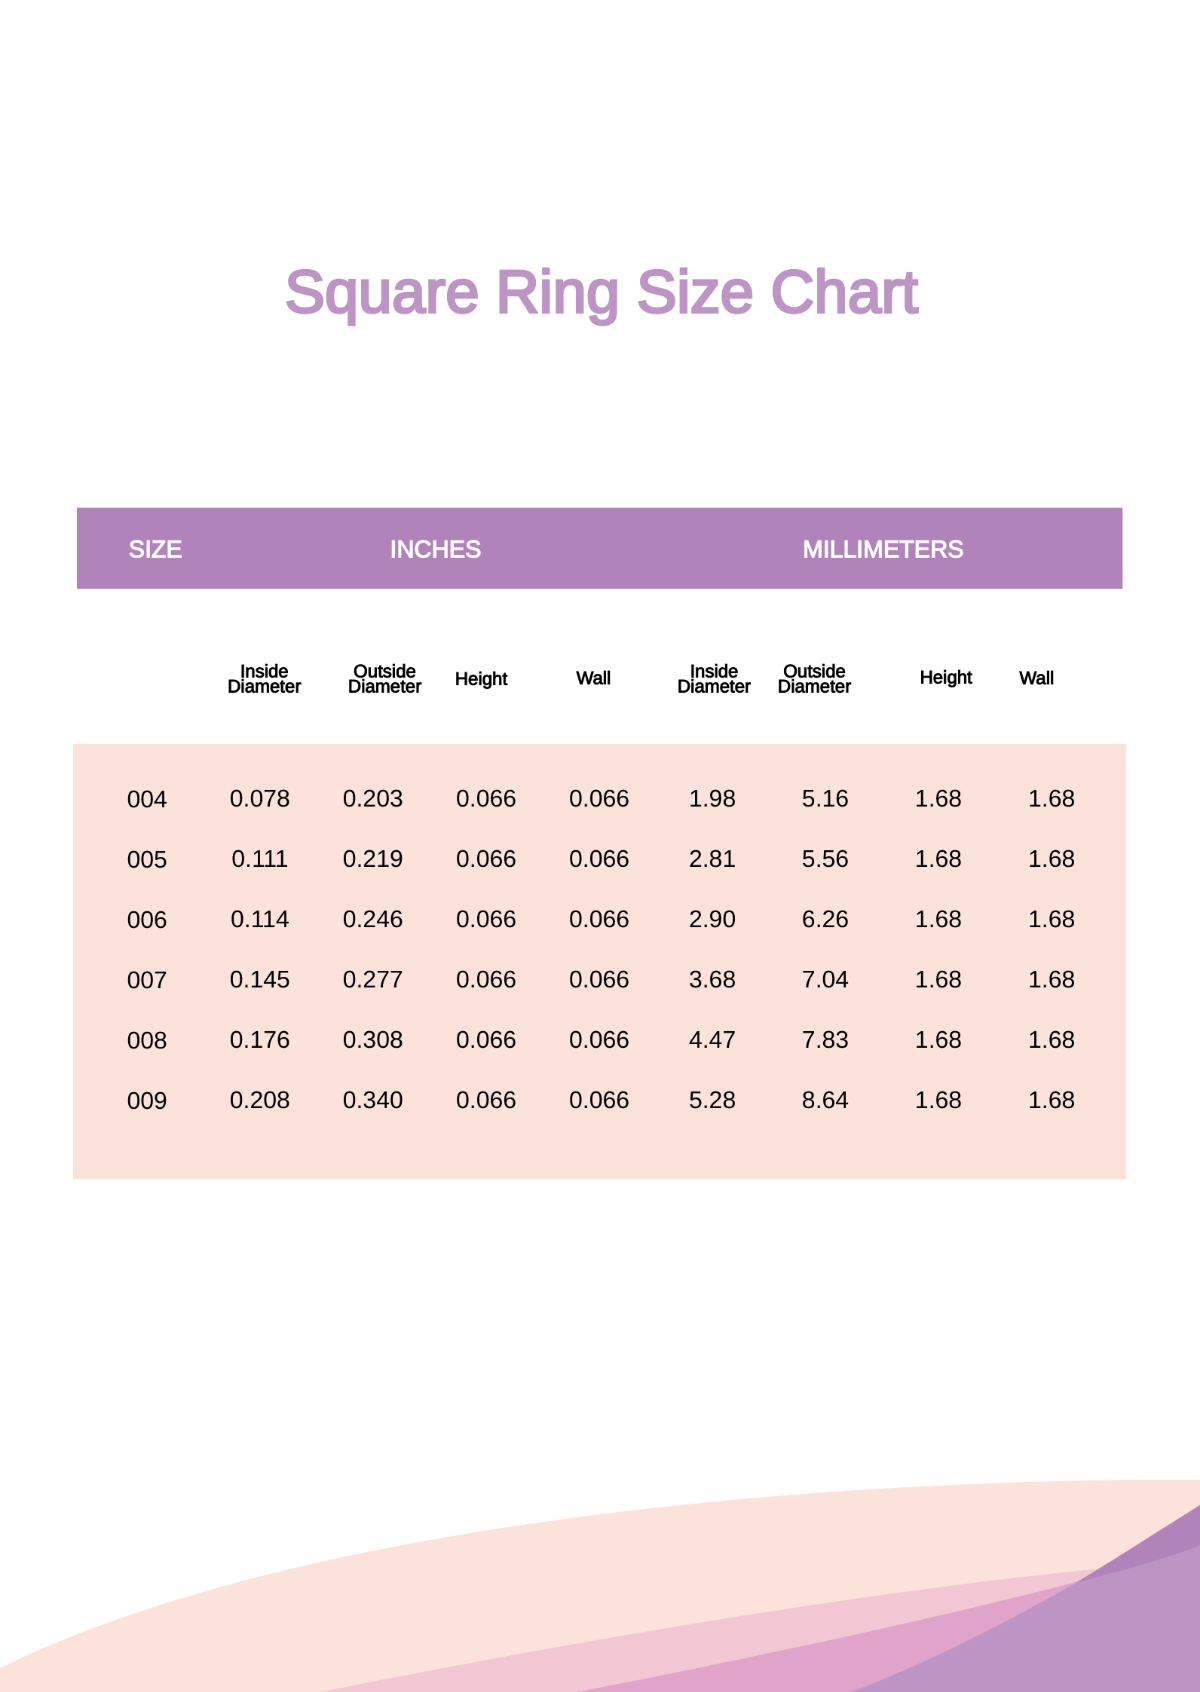 Square Ring Size Chart